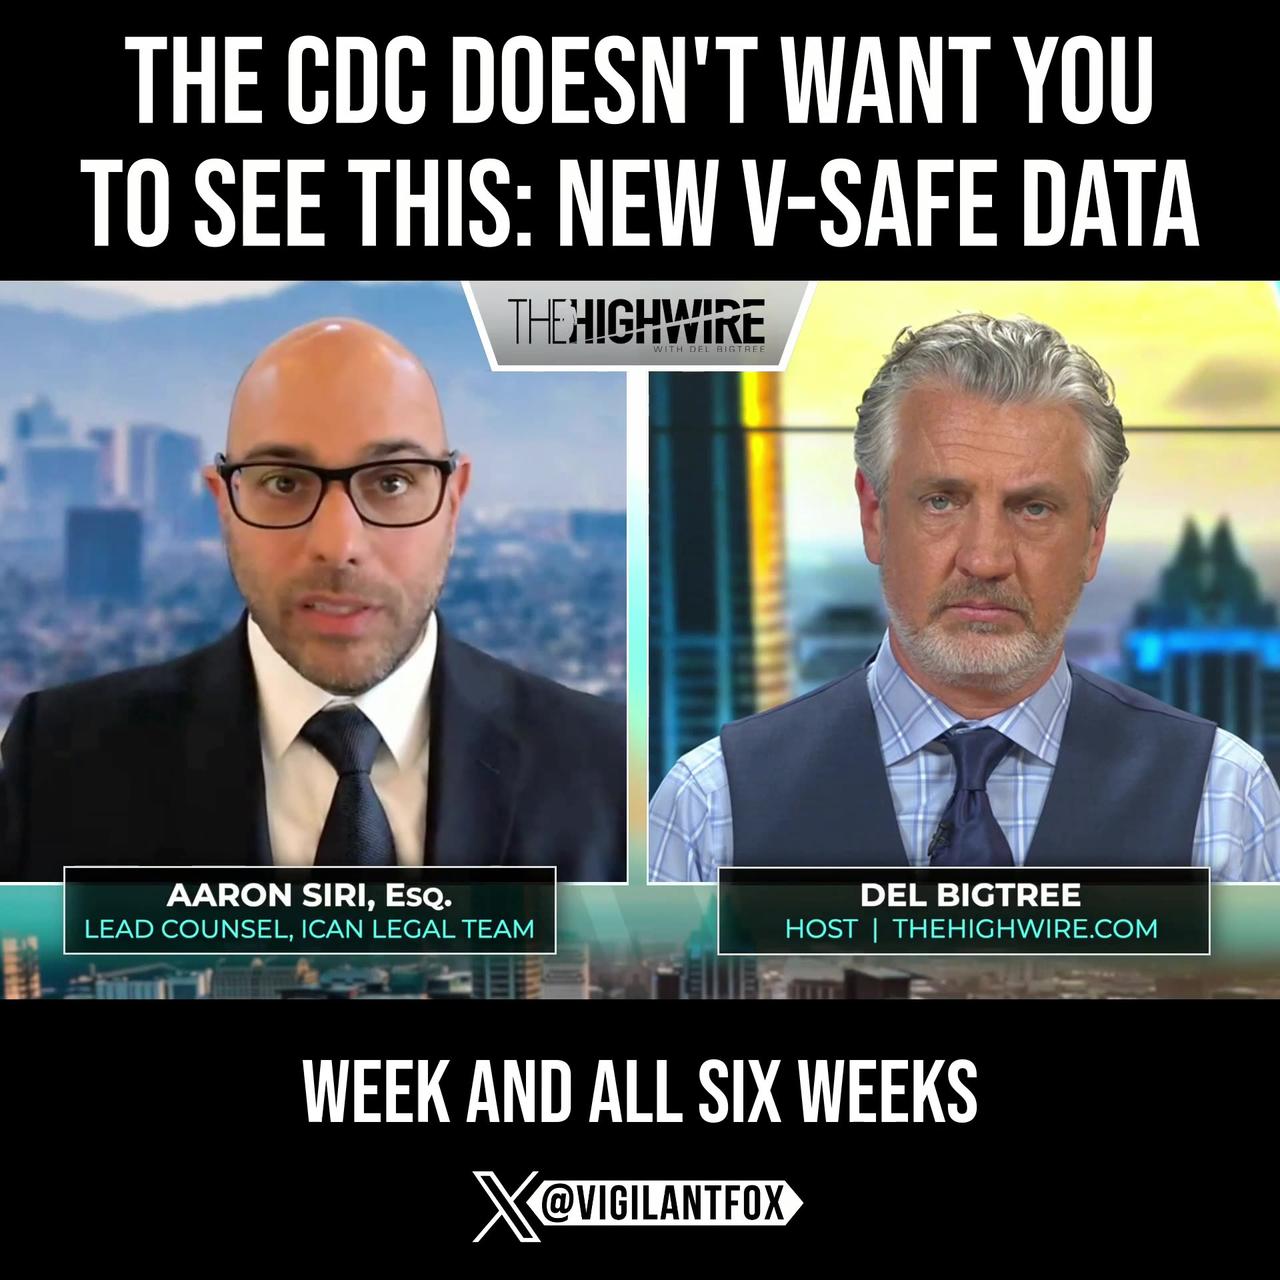 The CDC Doesn't Want You To See This Data